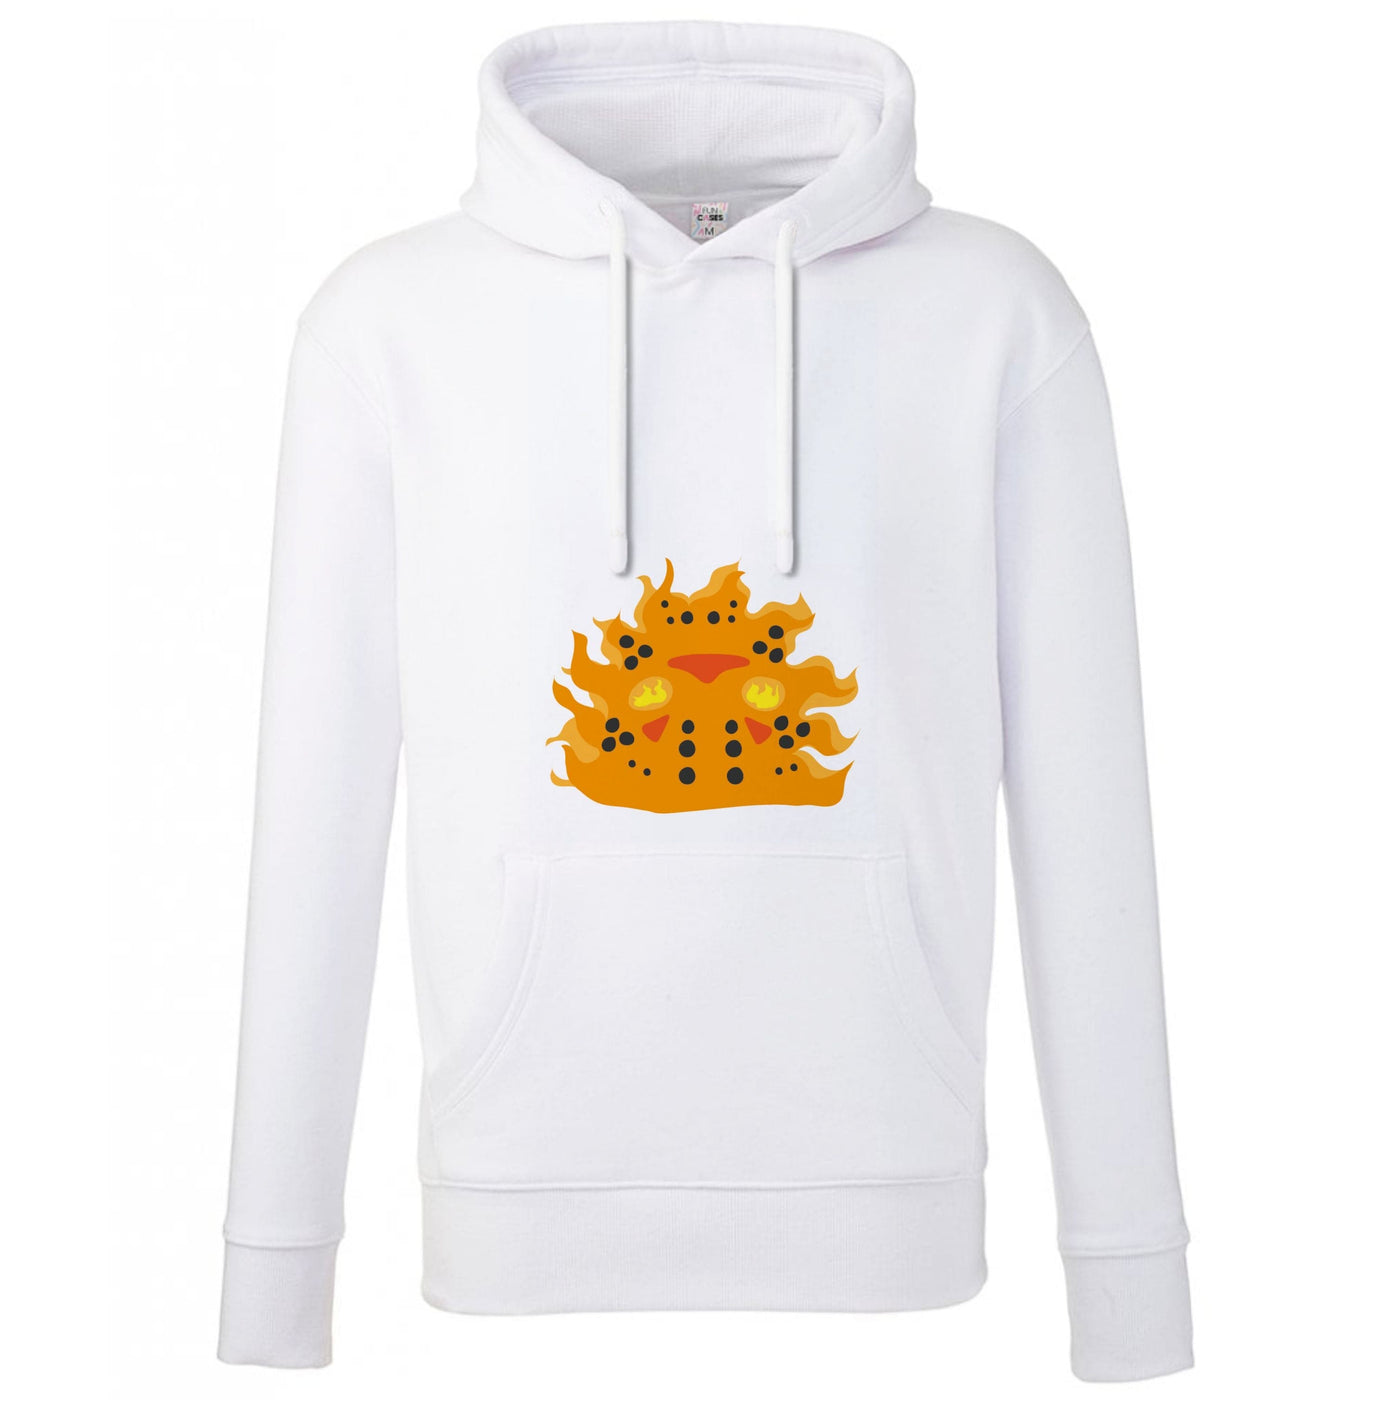 Capfire - Friday The 13th Hoodie